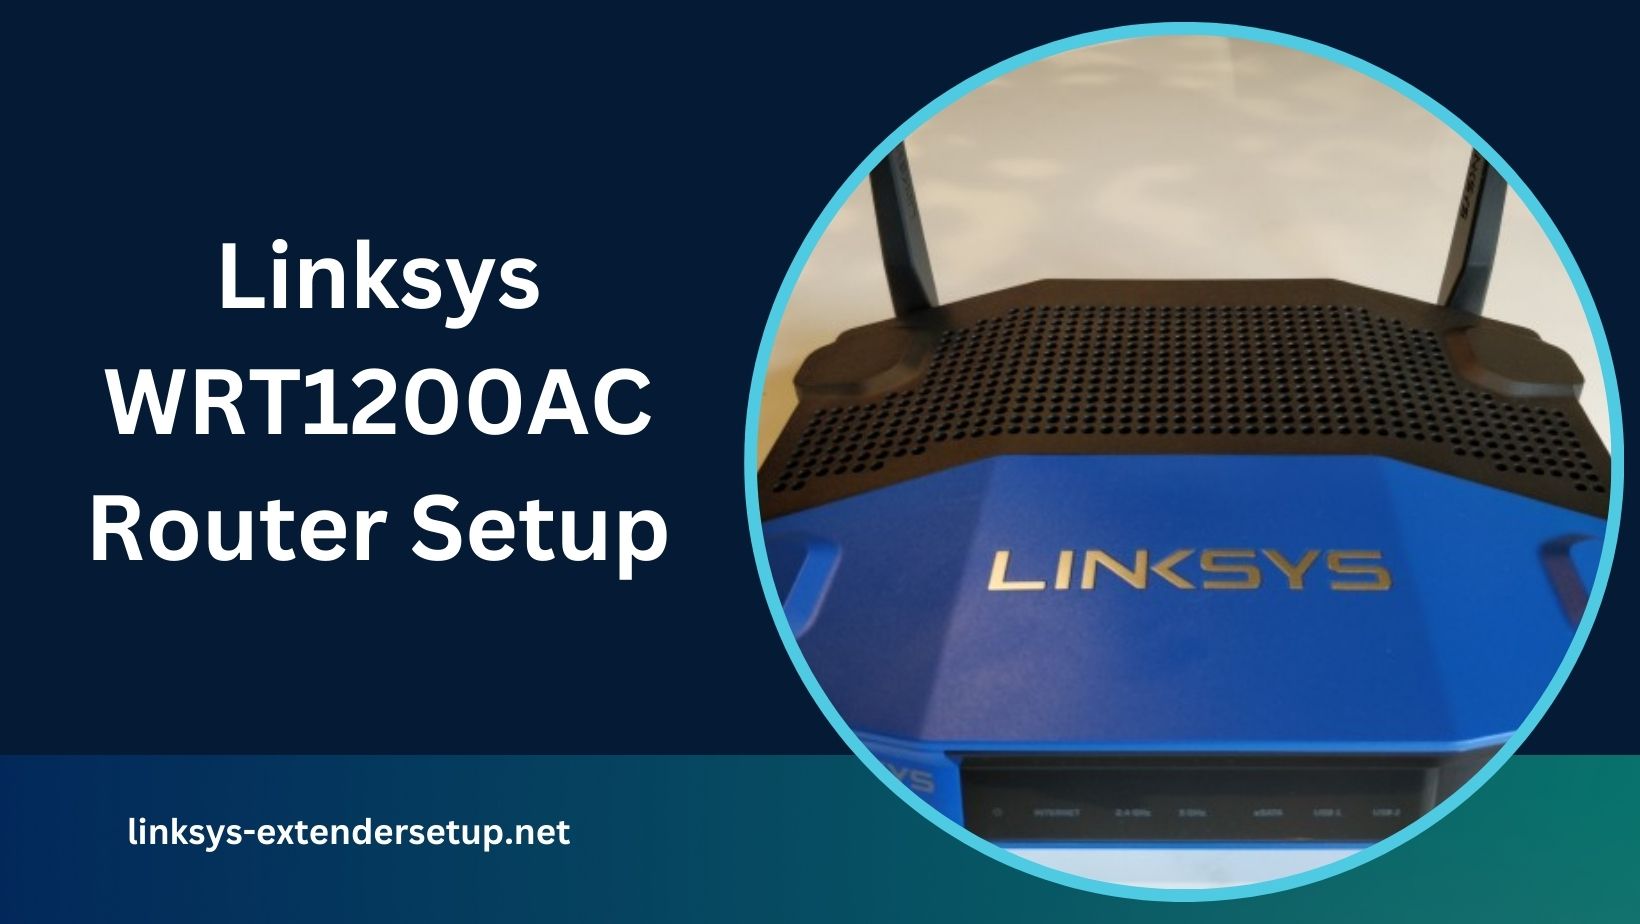 You are currently viewing Explaining the Linksys WRT1200AC Router Setup